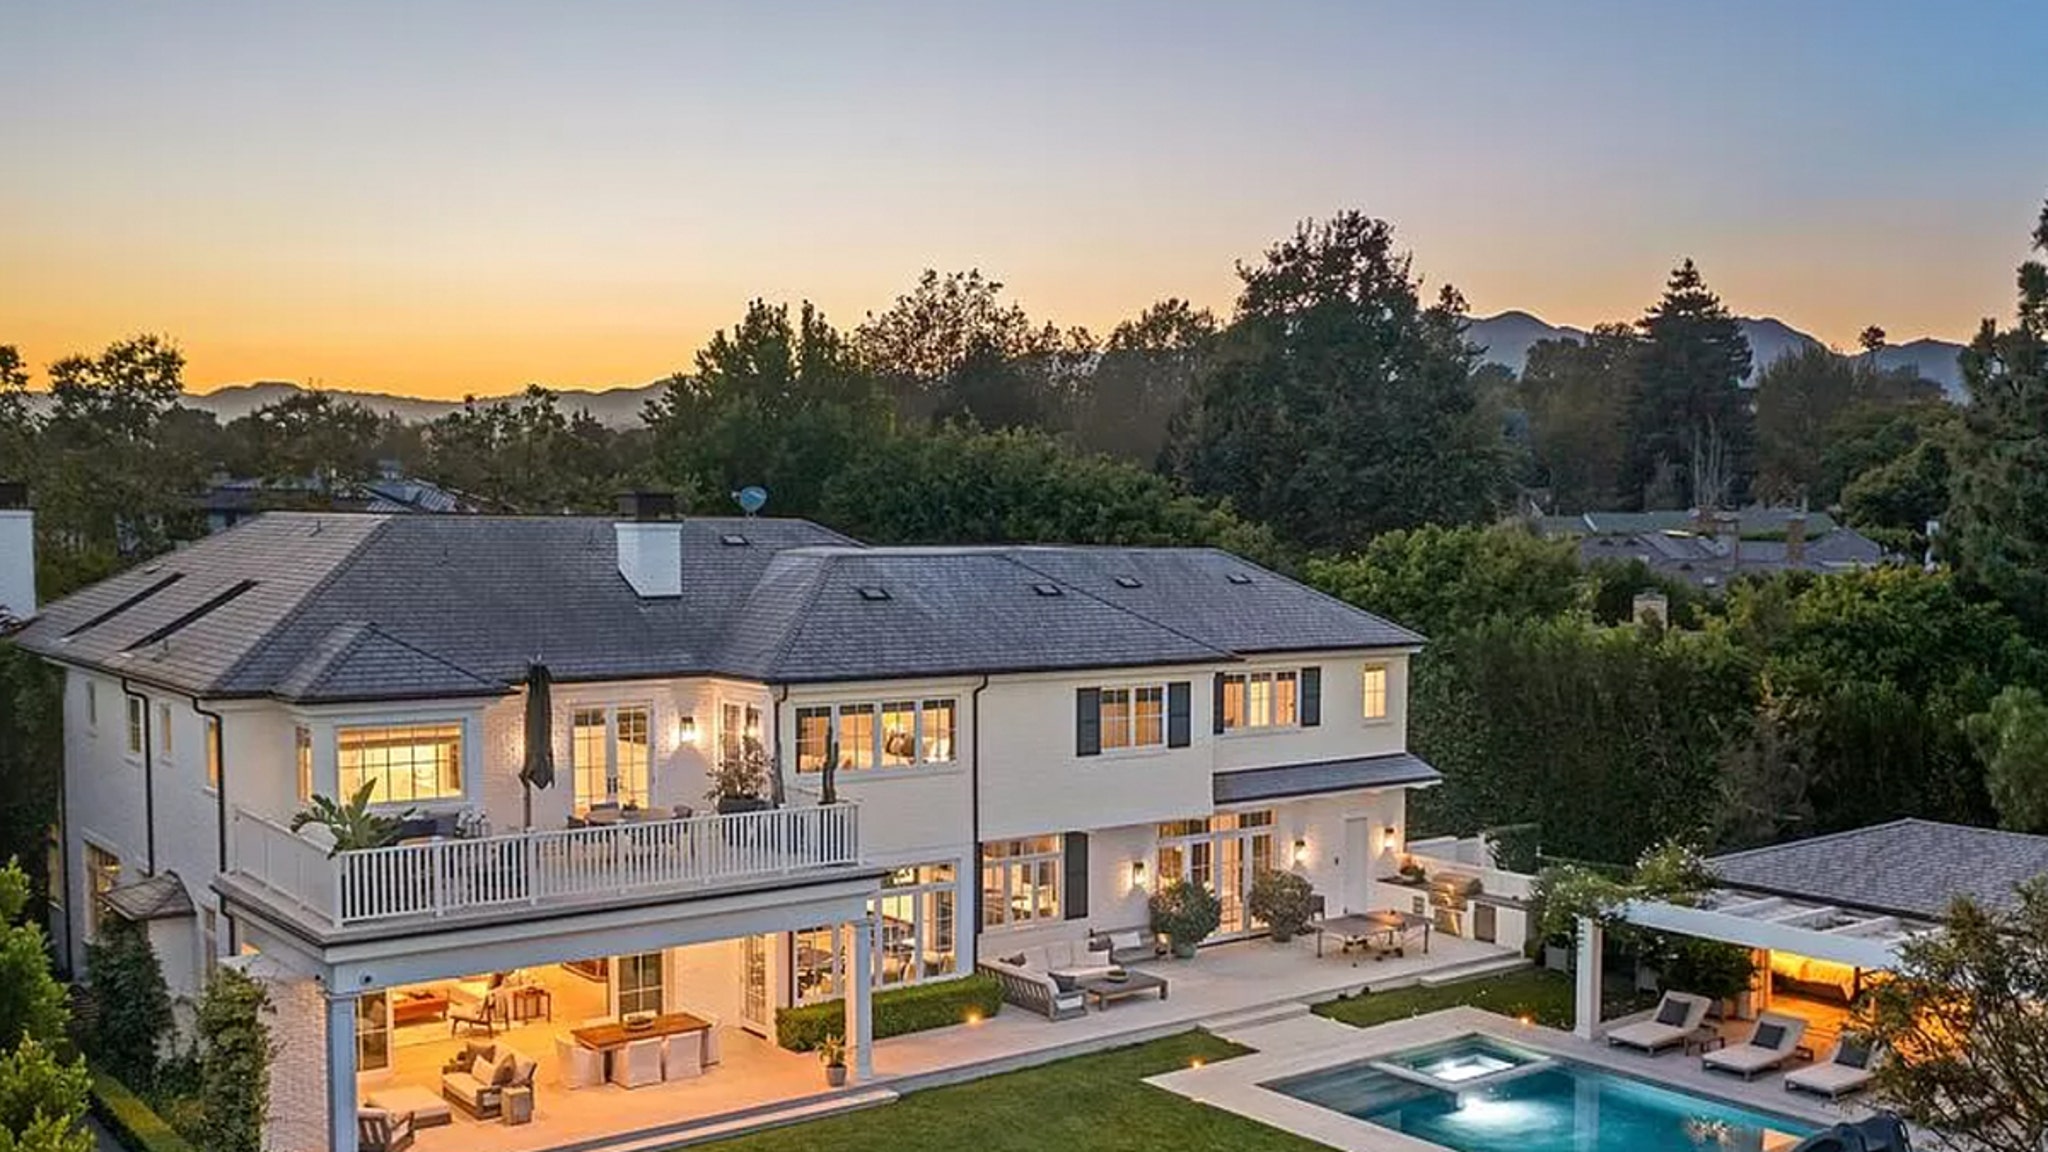 Ben Affleck Lists Pacific Palisades Home for $30 Million thumbnail